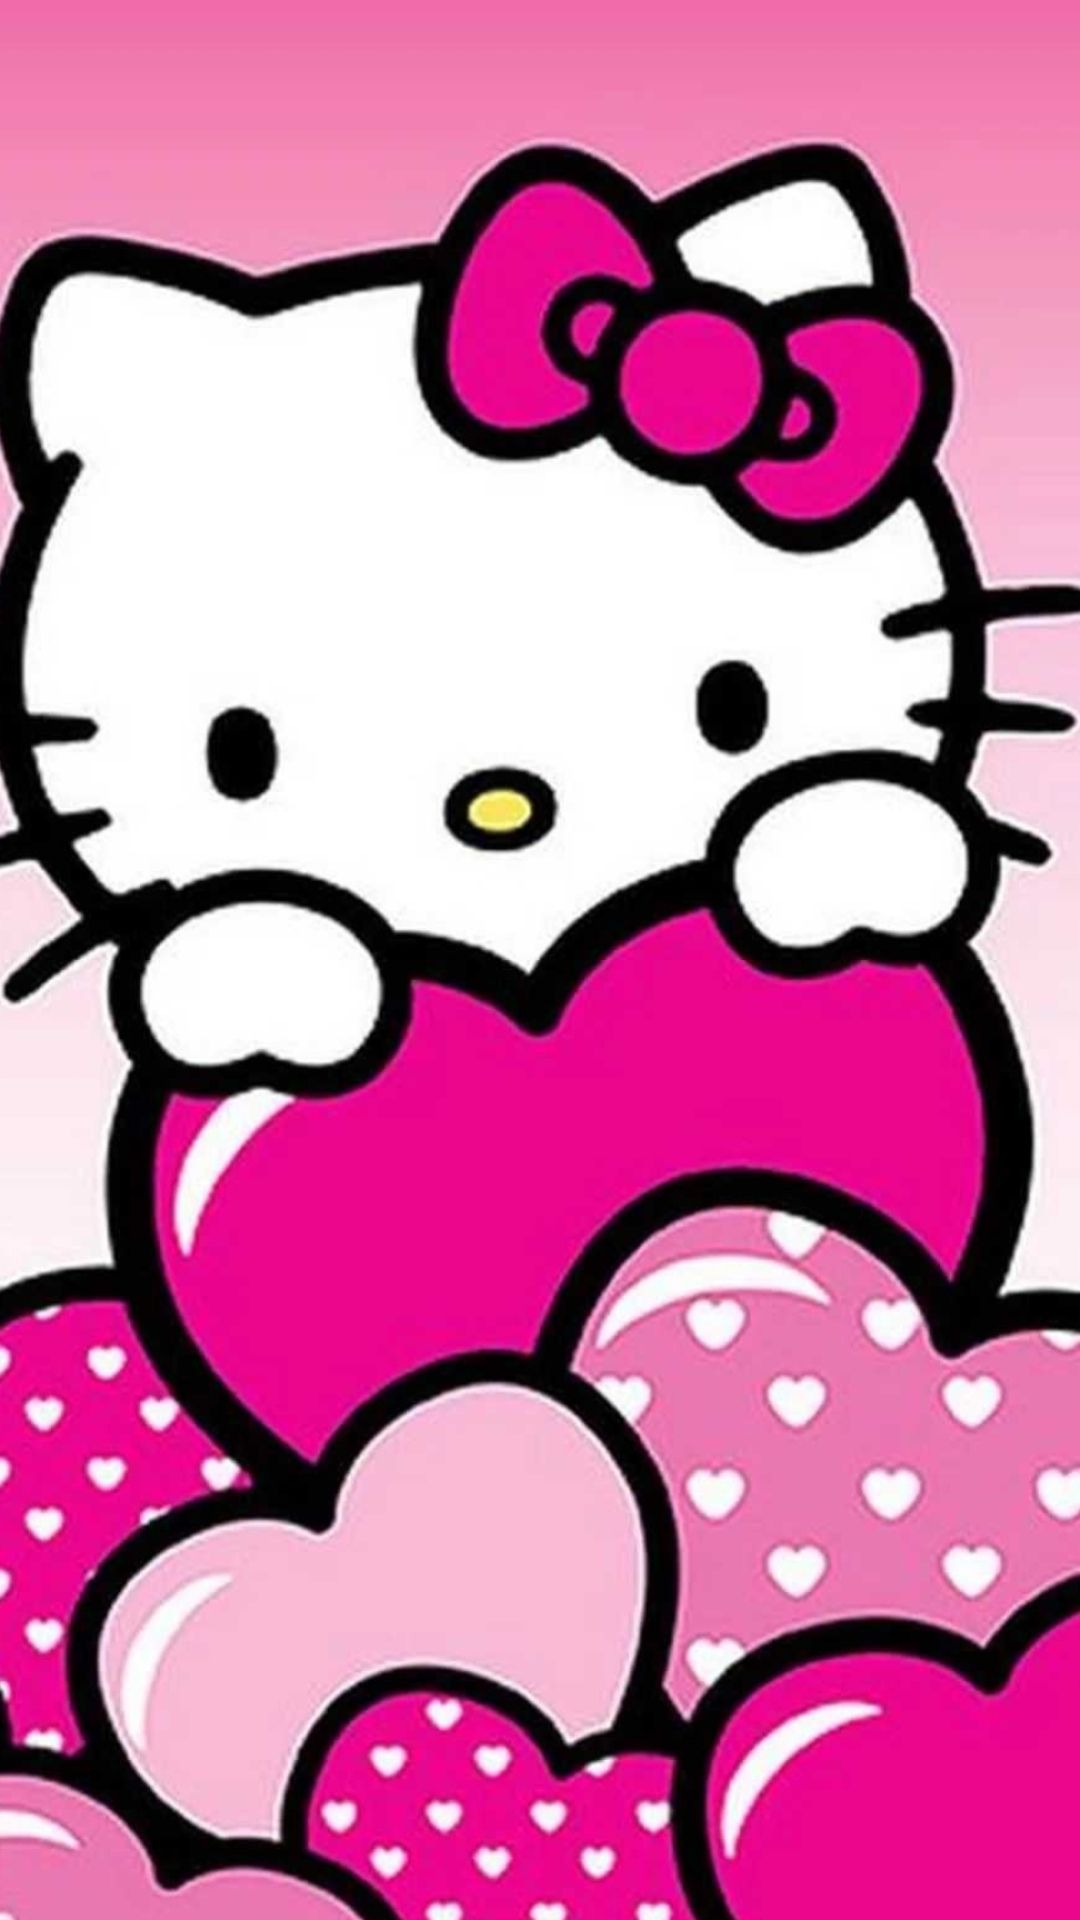 Hello Kitty: Appeared on a wide variety of products, including clothing, accessories, toys, and home appliances. 1080x1920 Full HD Background.